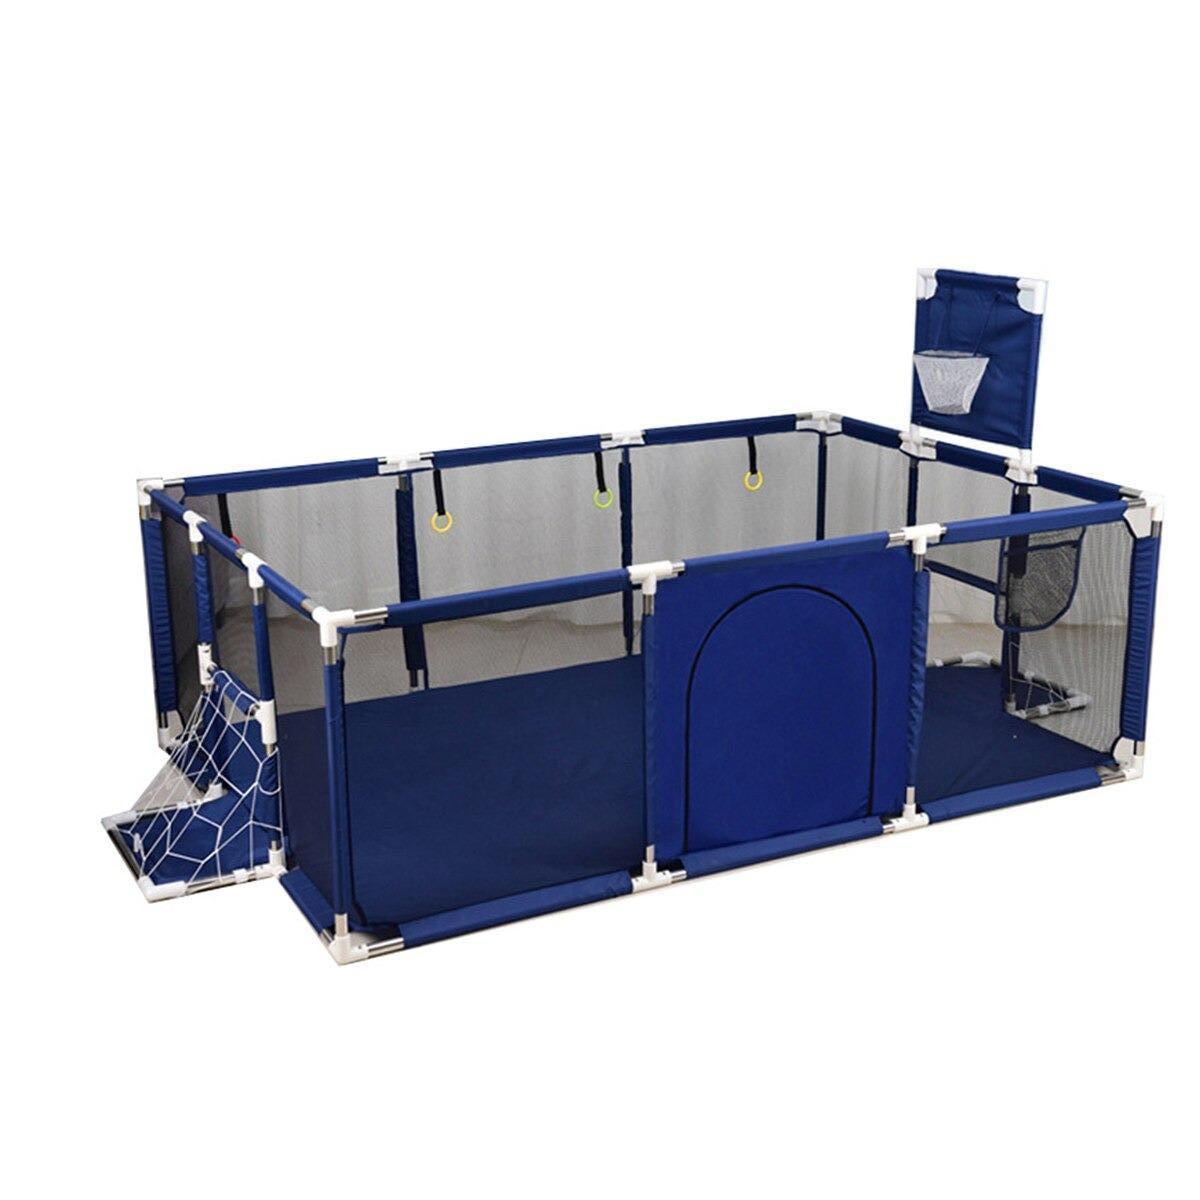 Foldable Playbox, Portable, Easy to Store